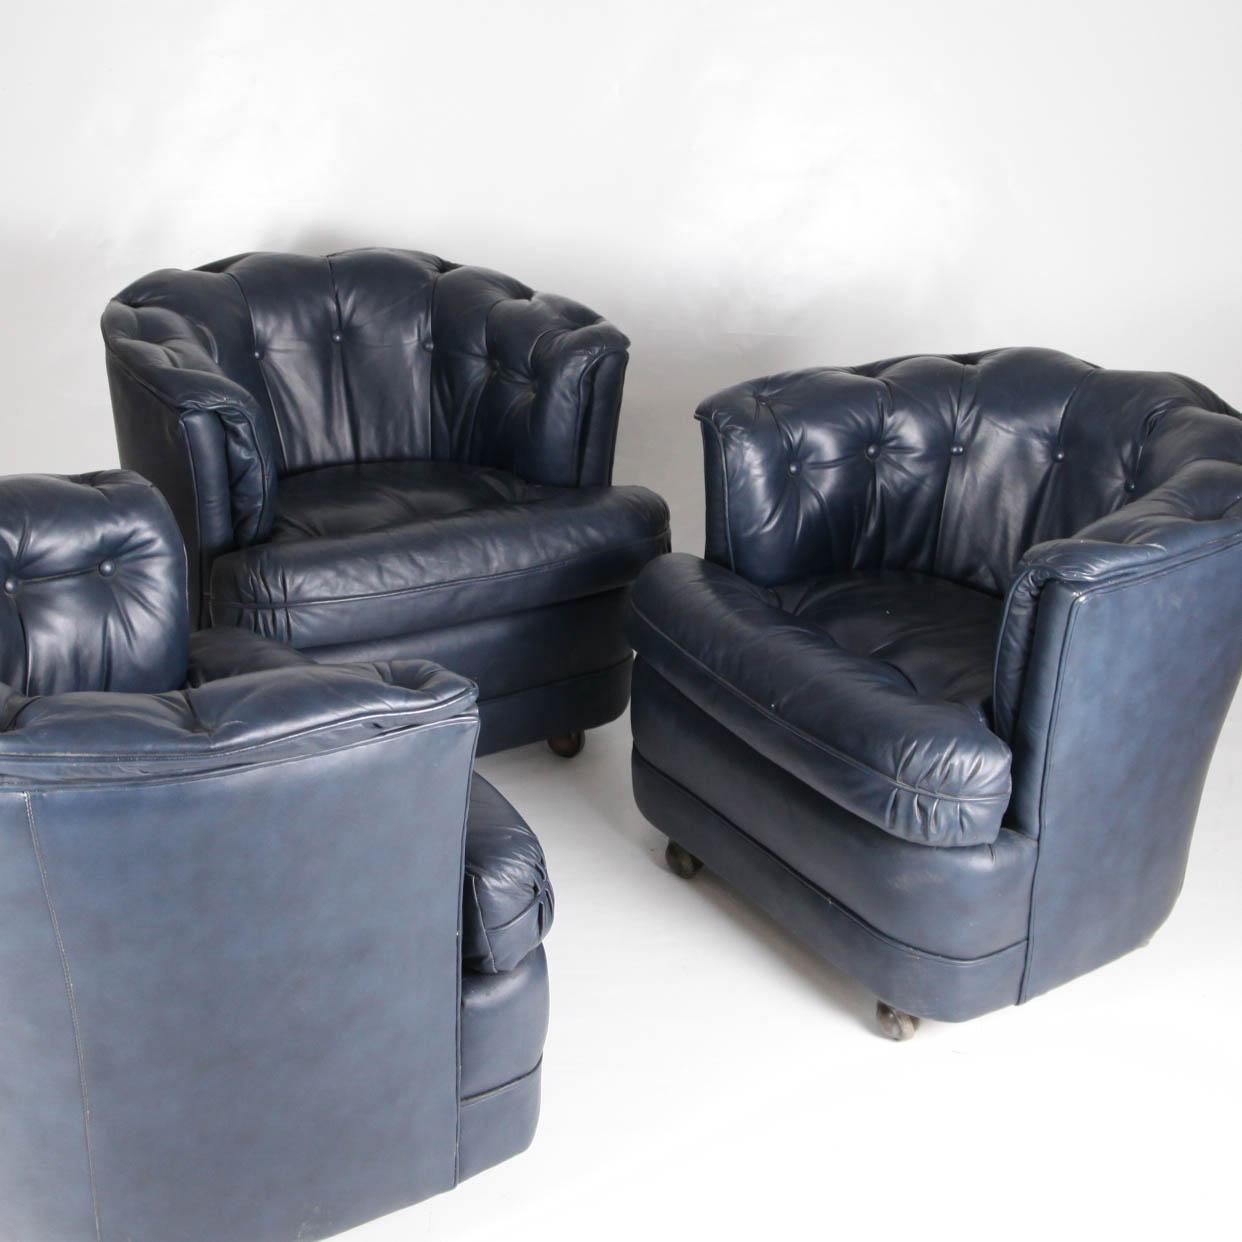 3 vintage small midnight blue leather armchairs with brass casters by Richard Plumer ciaca 1982. They are chic and comfortable. Surely inspired by Chesterfield chairs with different details. Unique design and color.